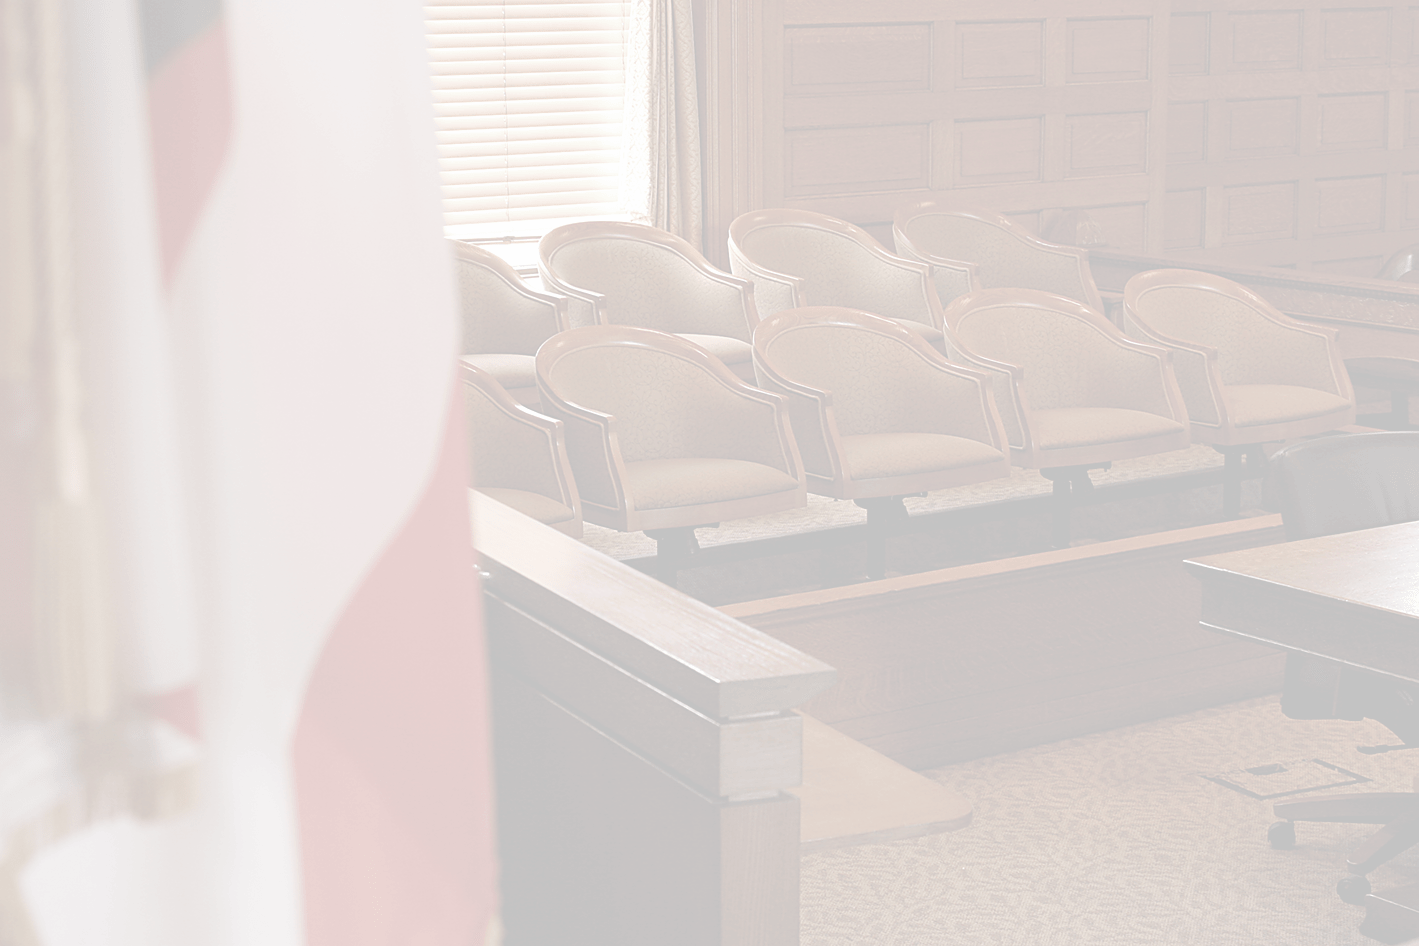 Jury box in a courtroom with American flag in foreground (transparent)